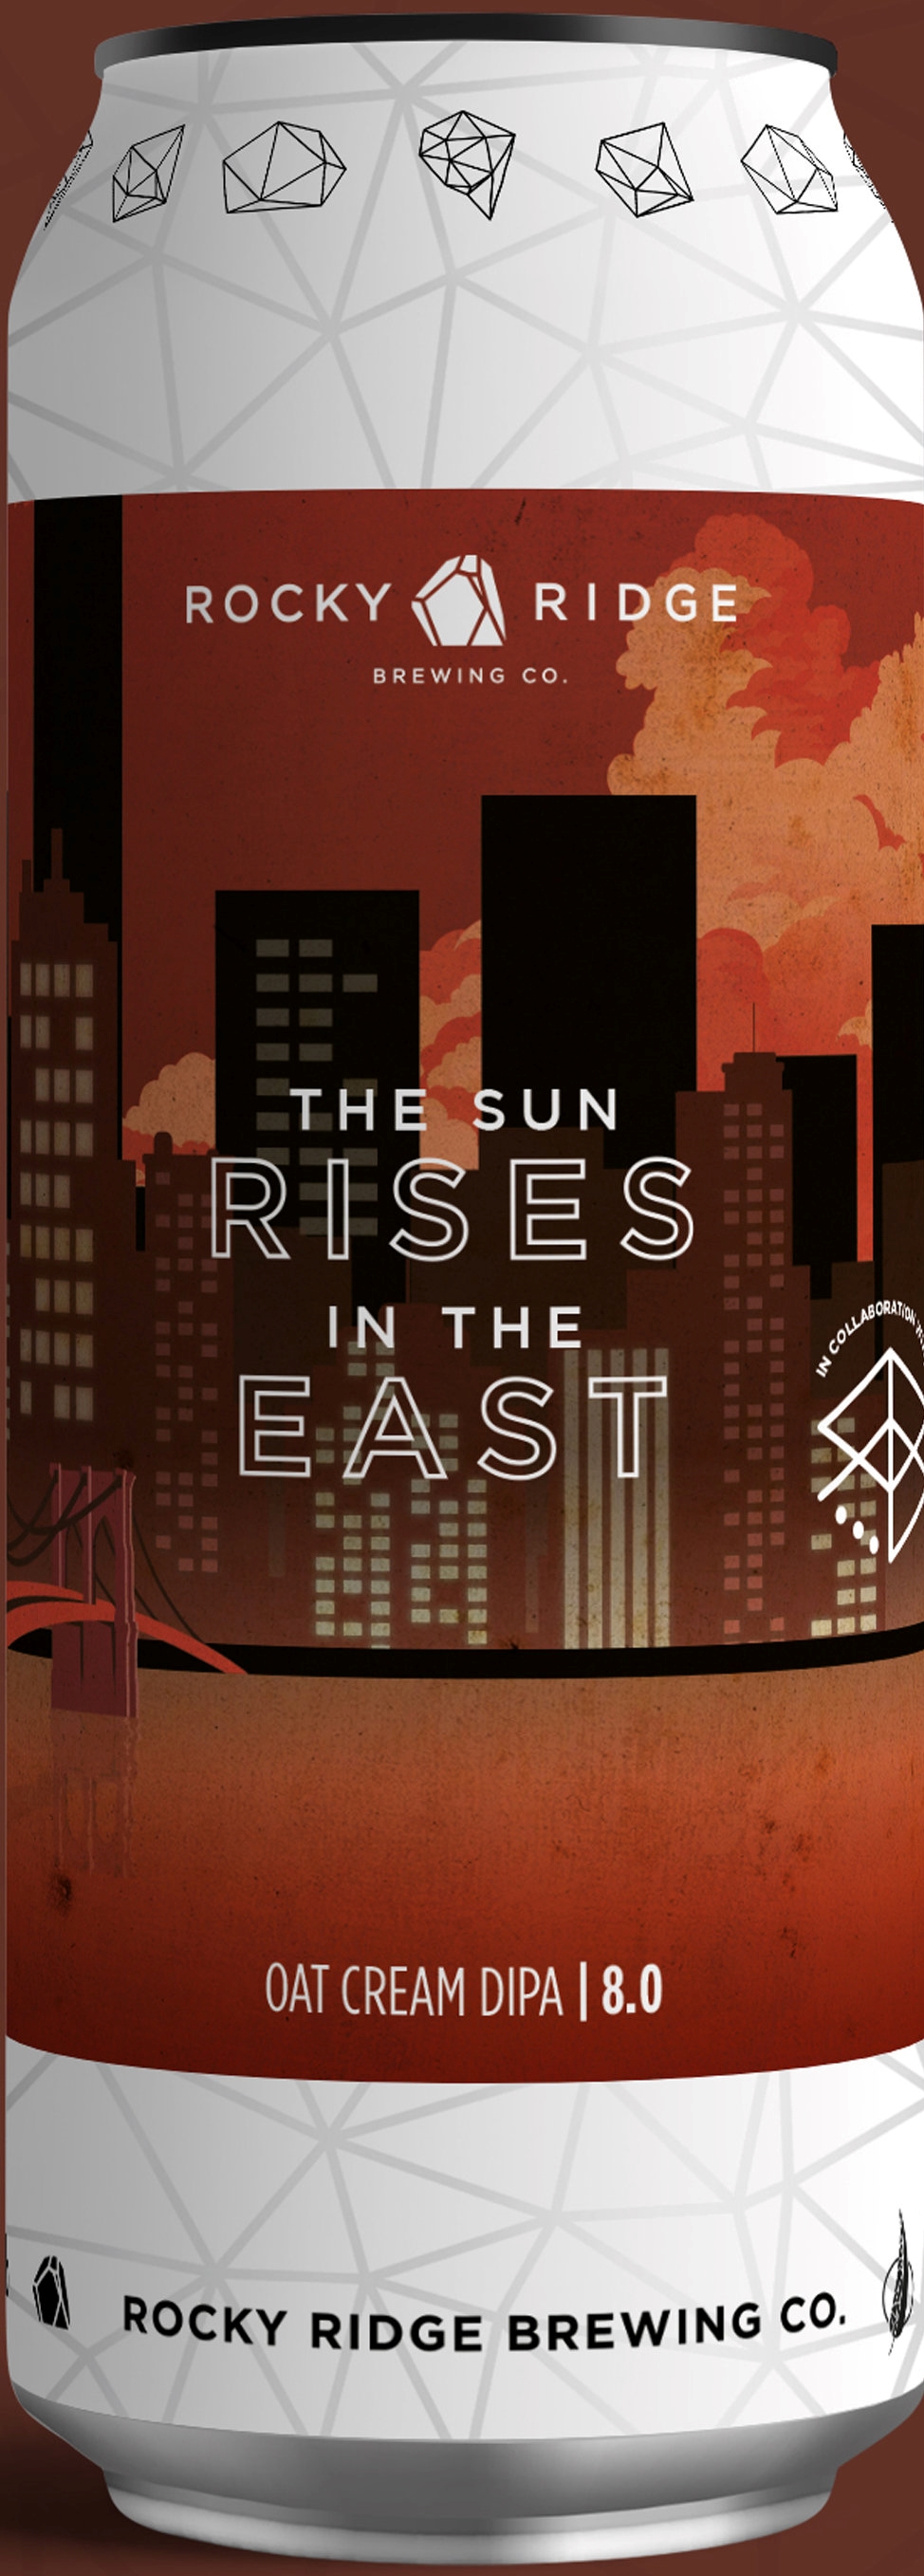 The Sun Rises in the East